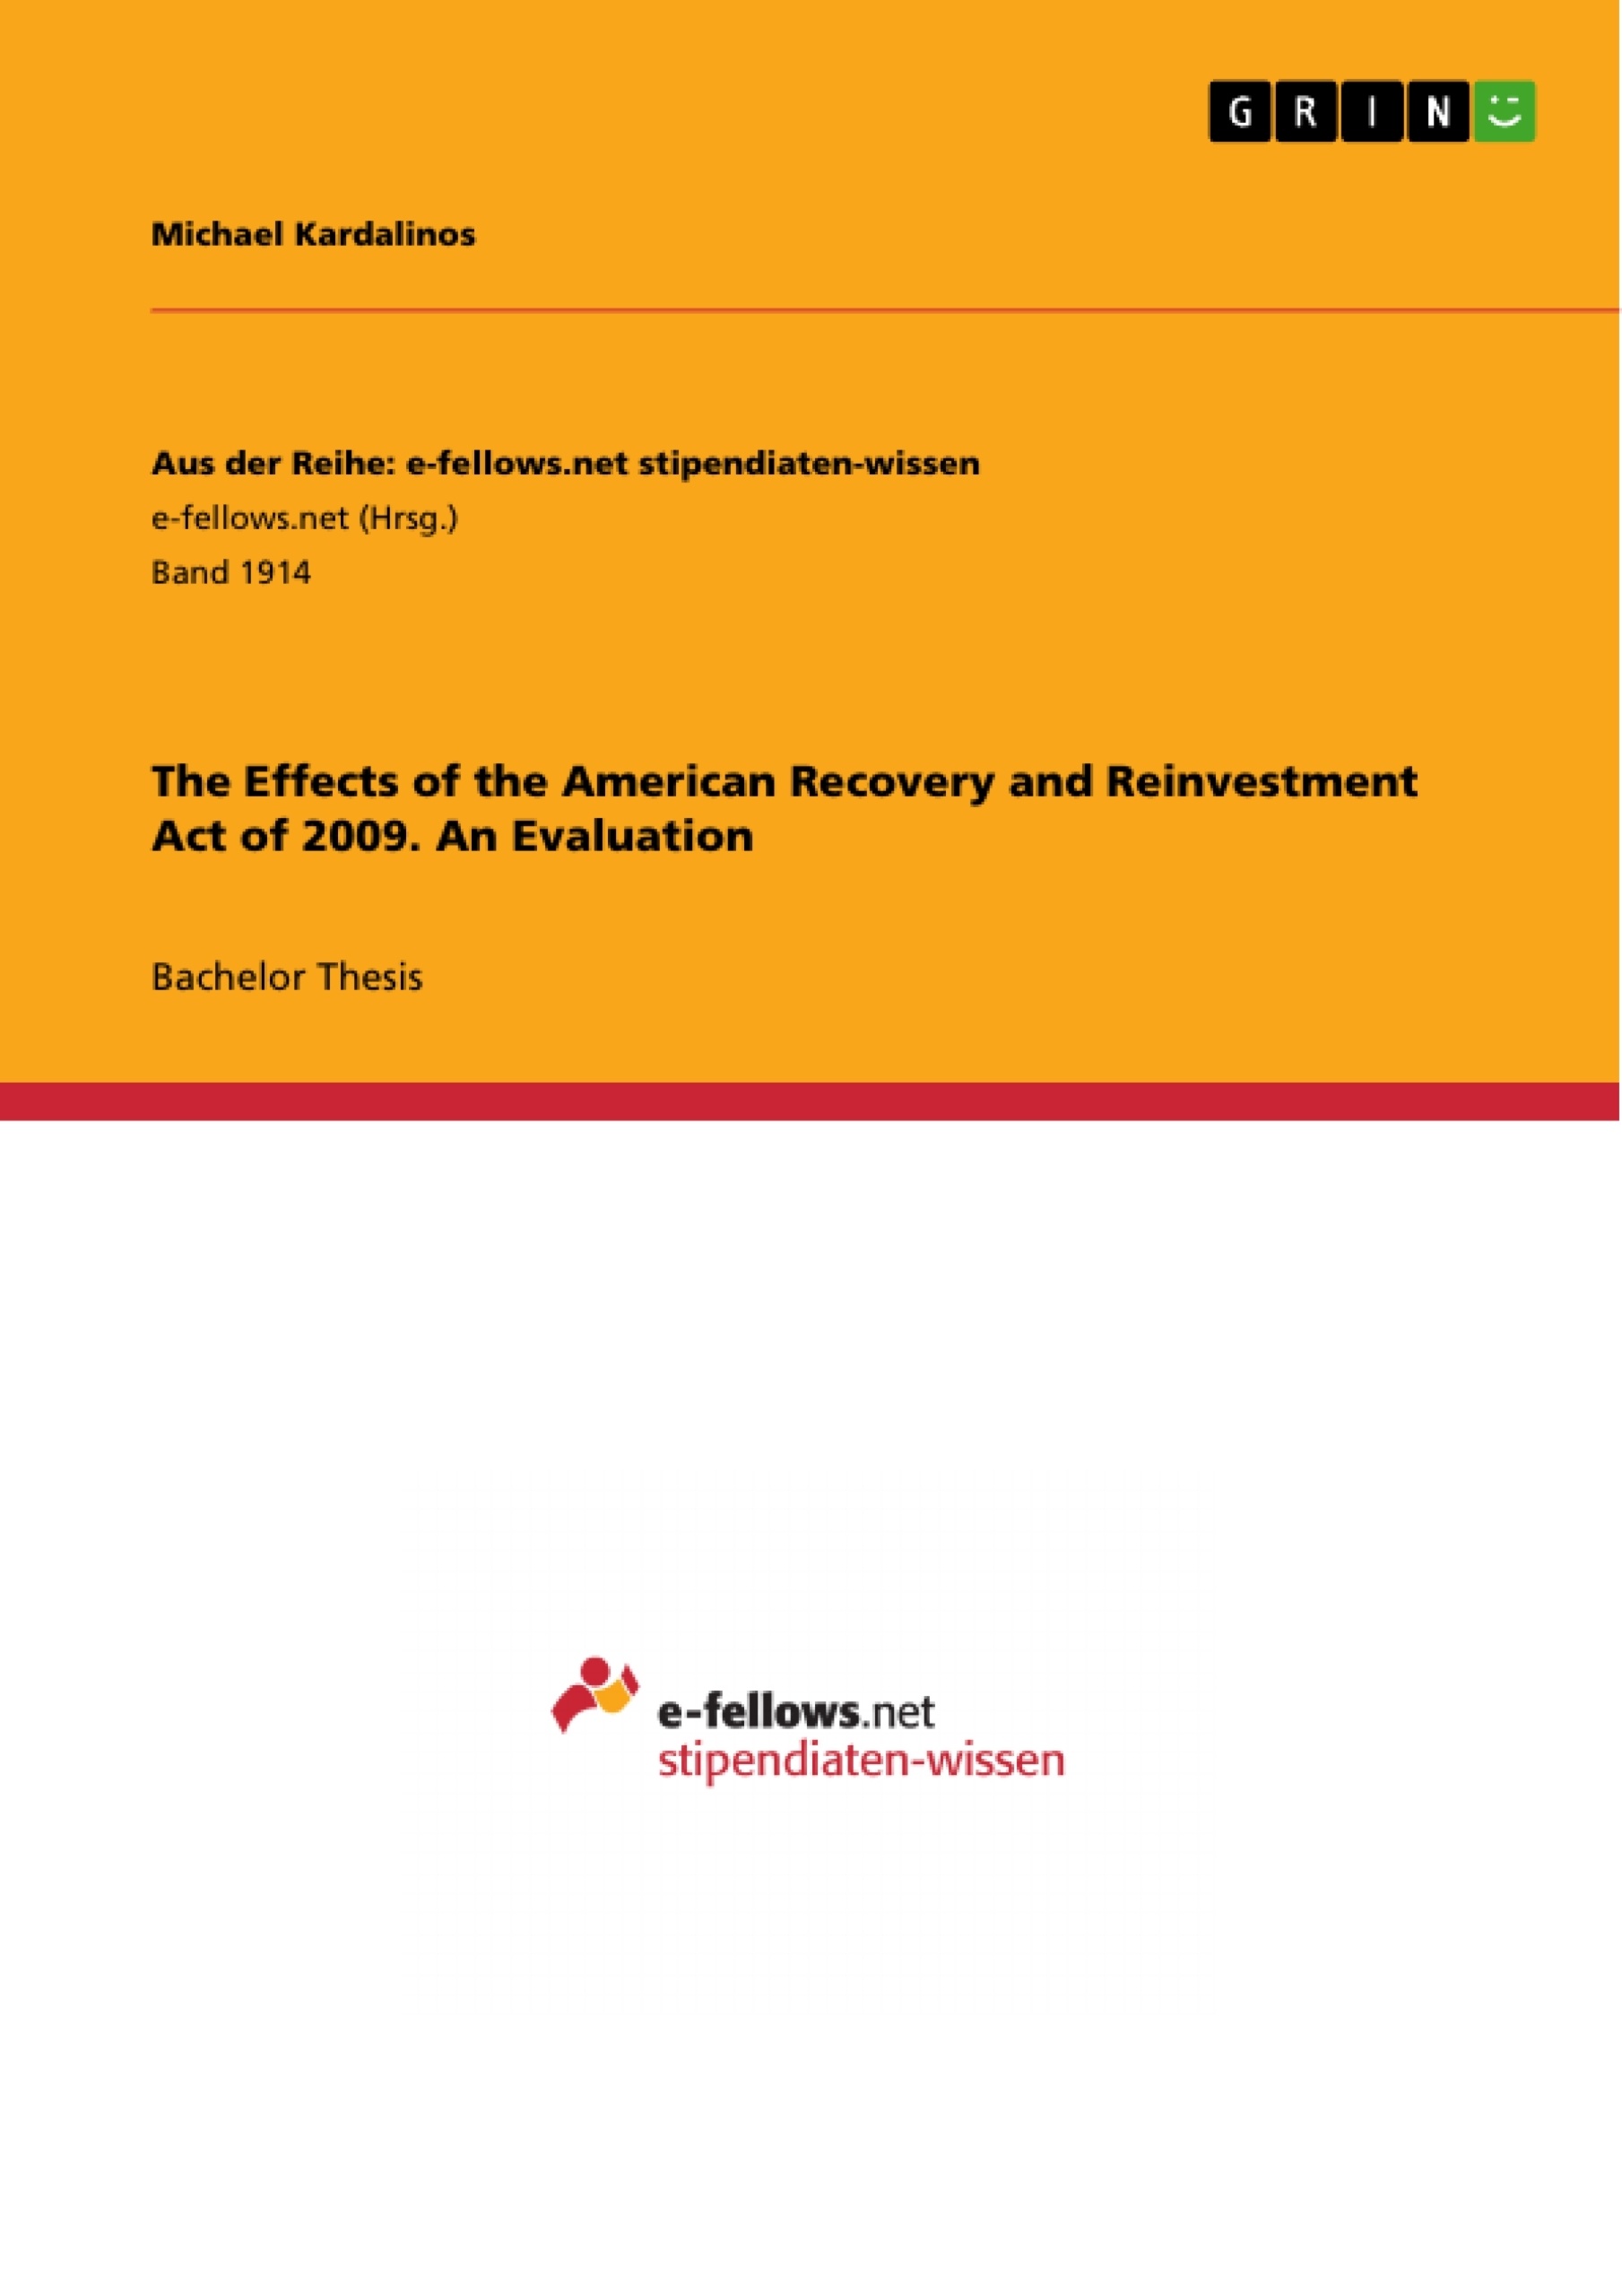 Title: The Effects of the American Recovery and Reinvestment Act of 2009. An Evaluation